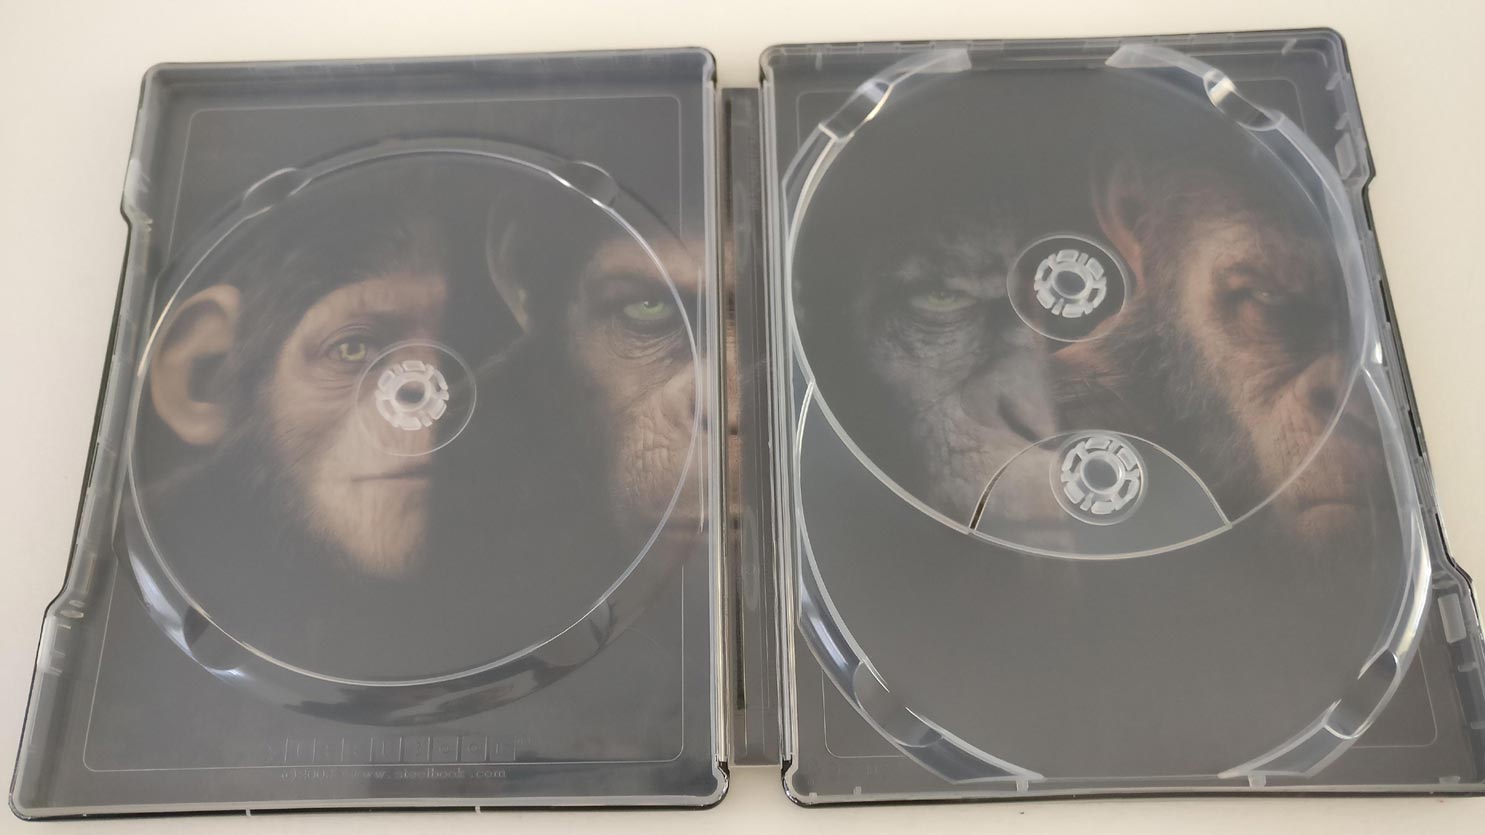 Planet-of-the-apes-trilogy-steelbook-2